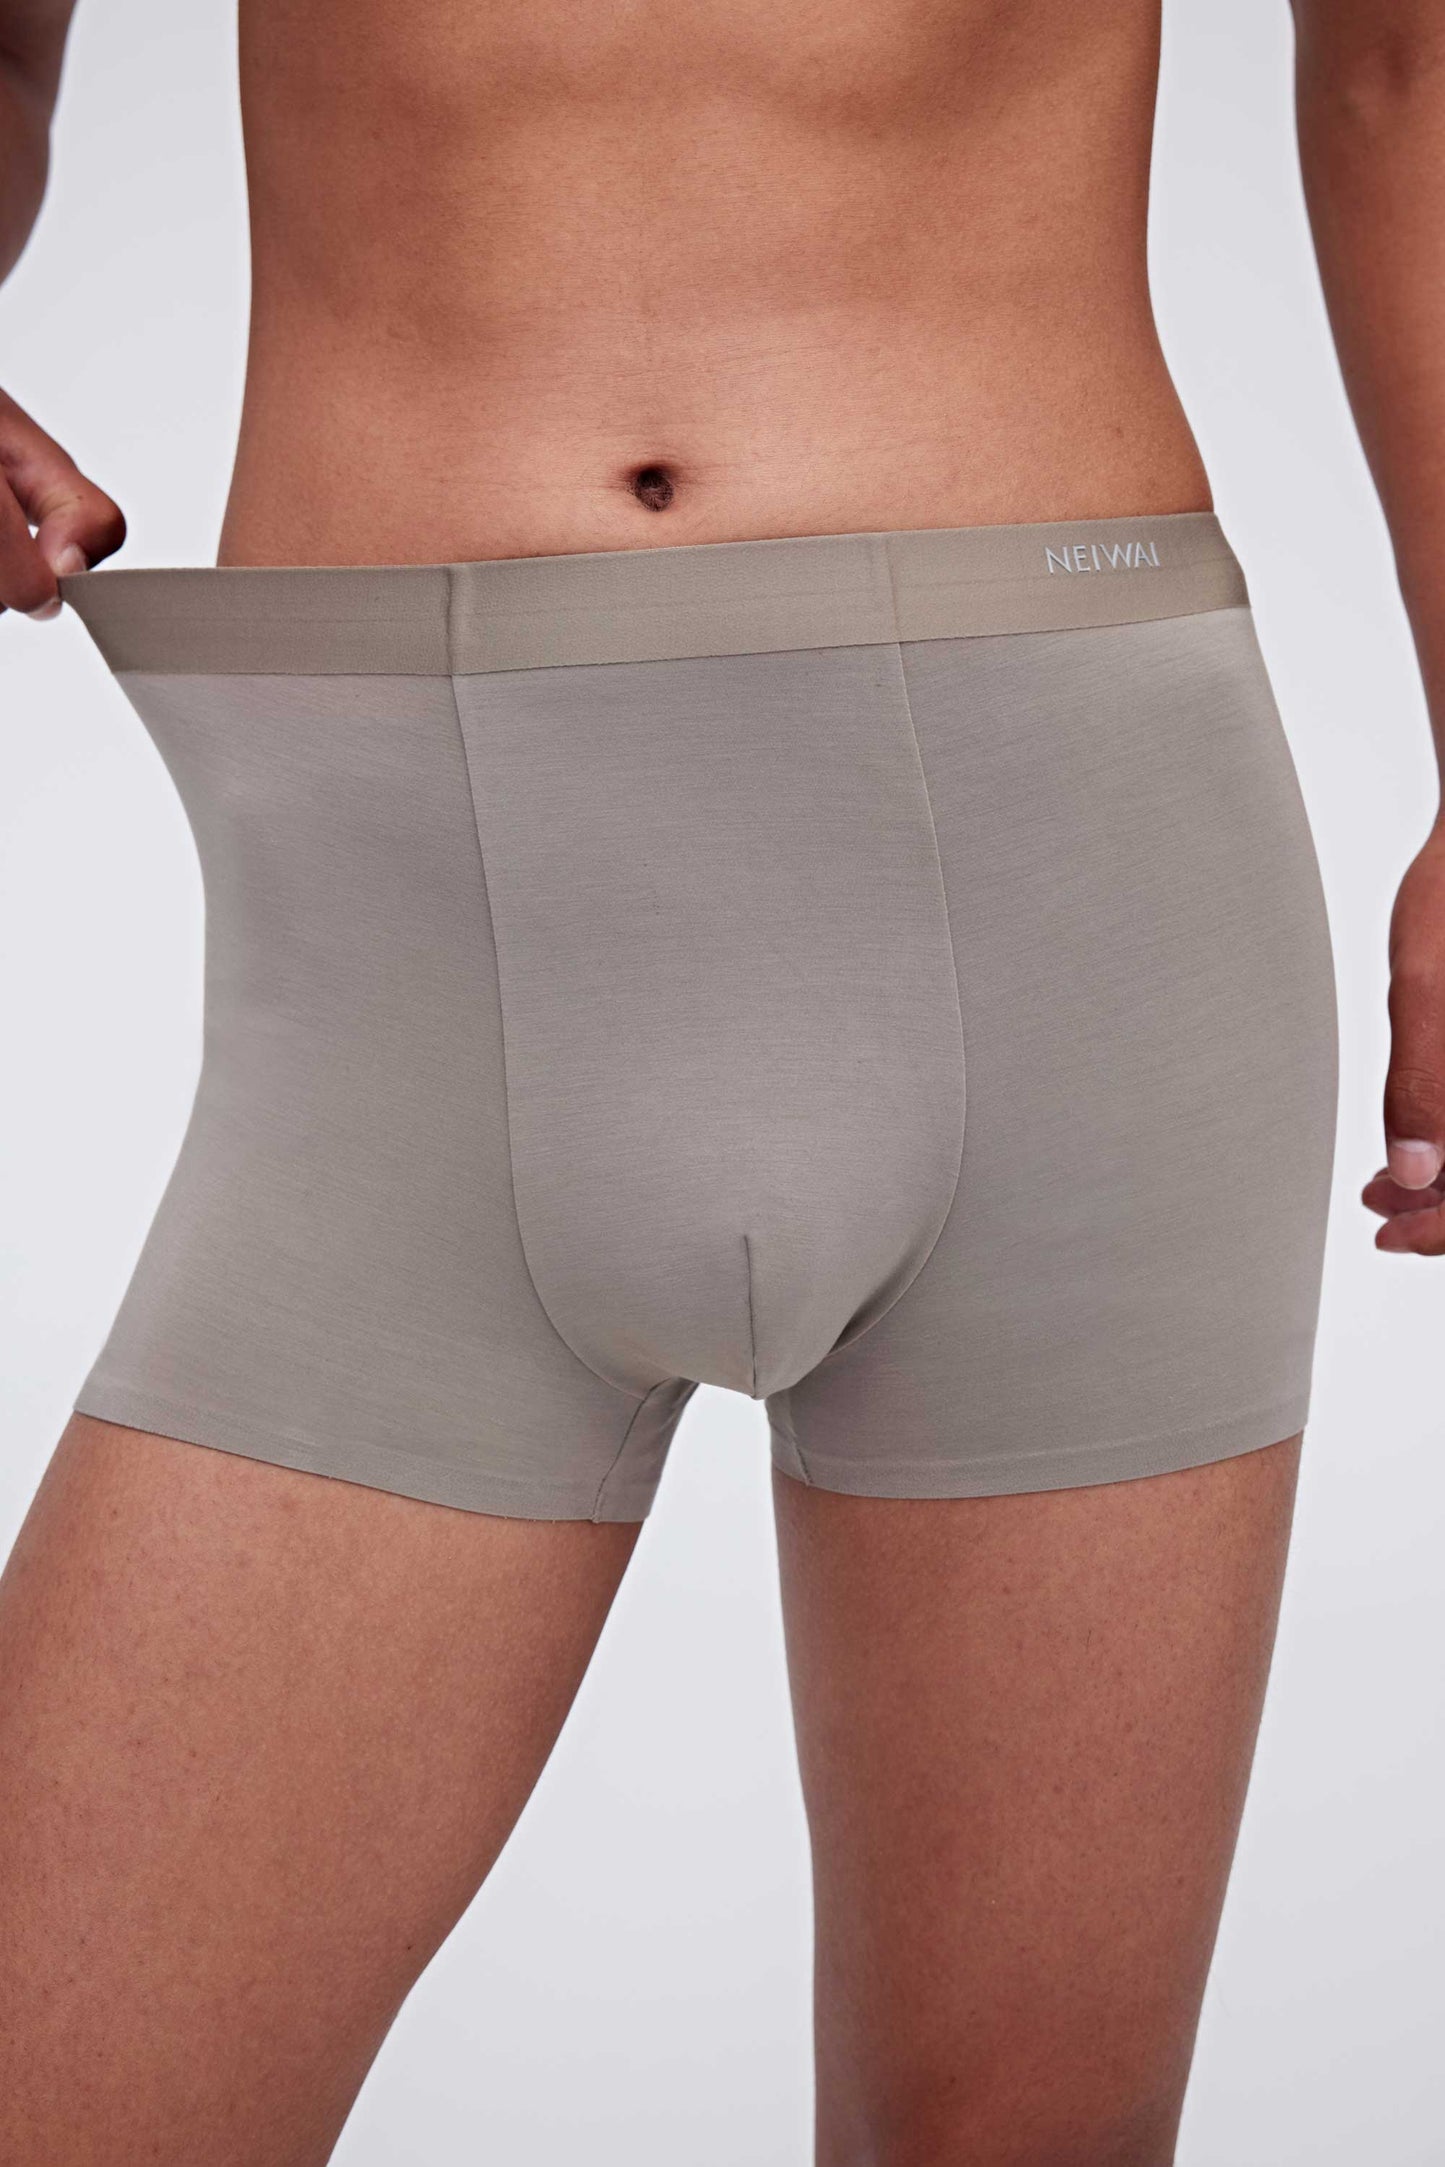 close up of the grey brief